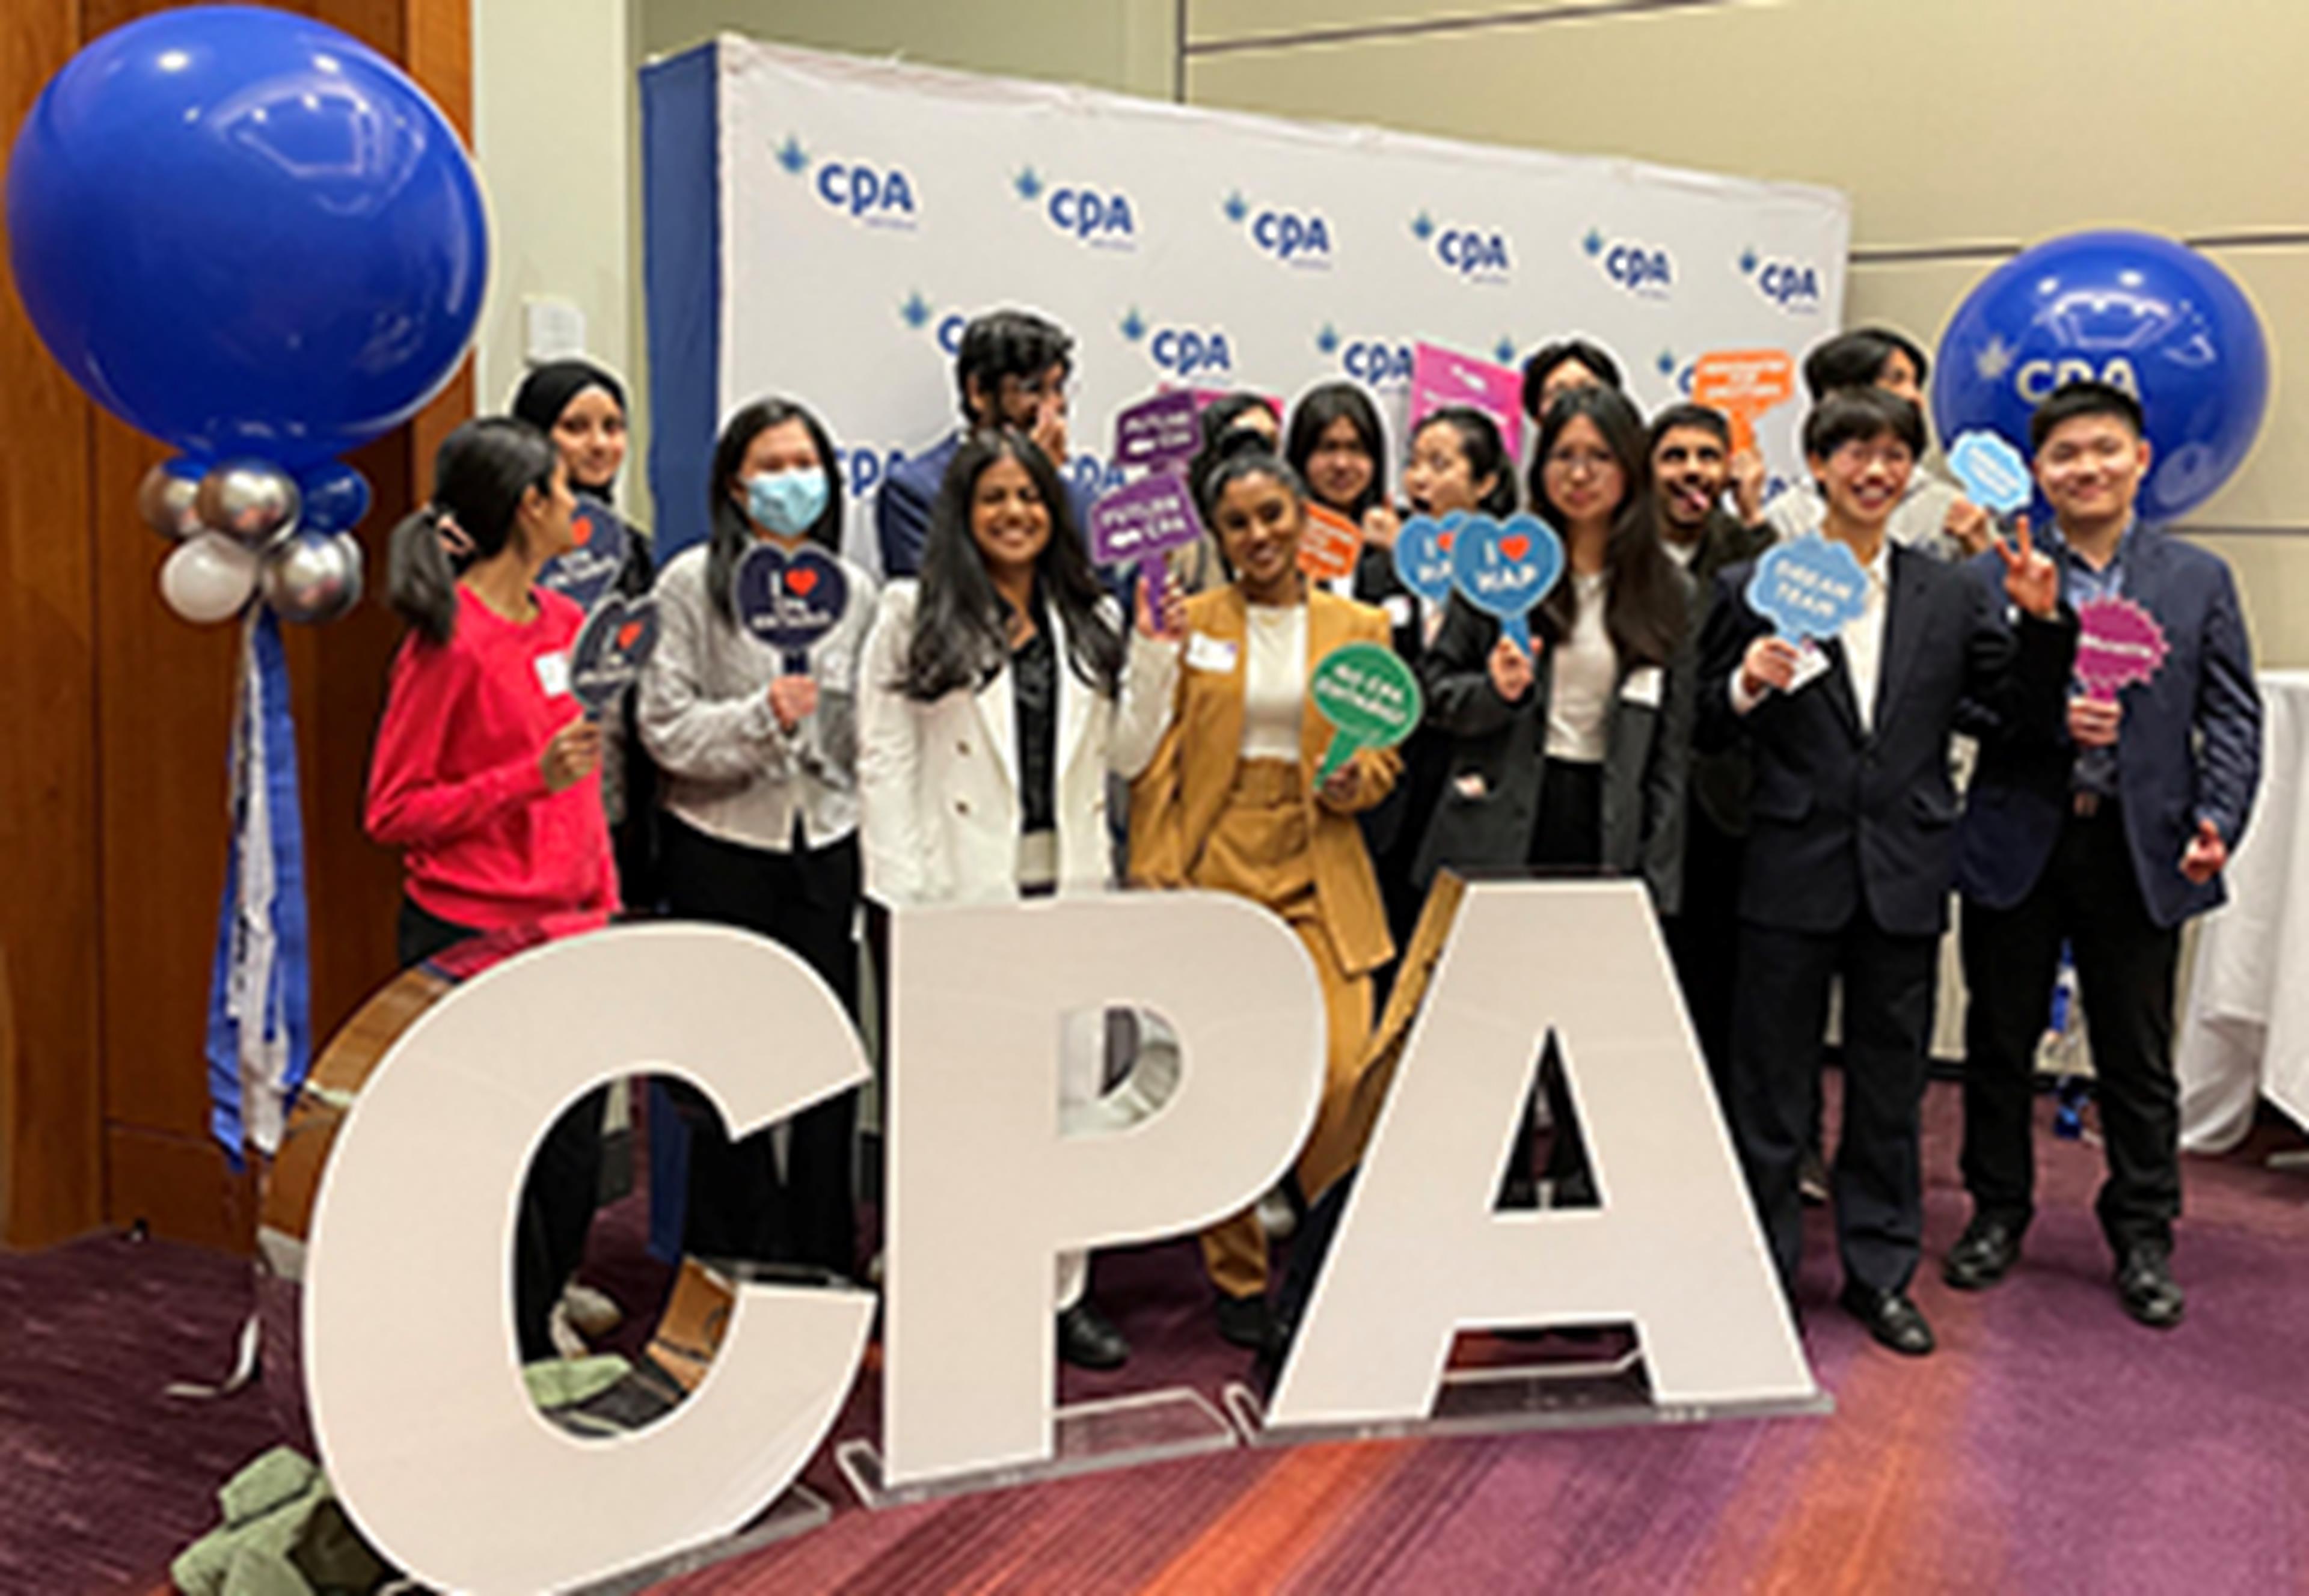 Group on students standing behind CPA sign